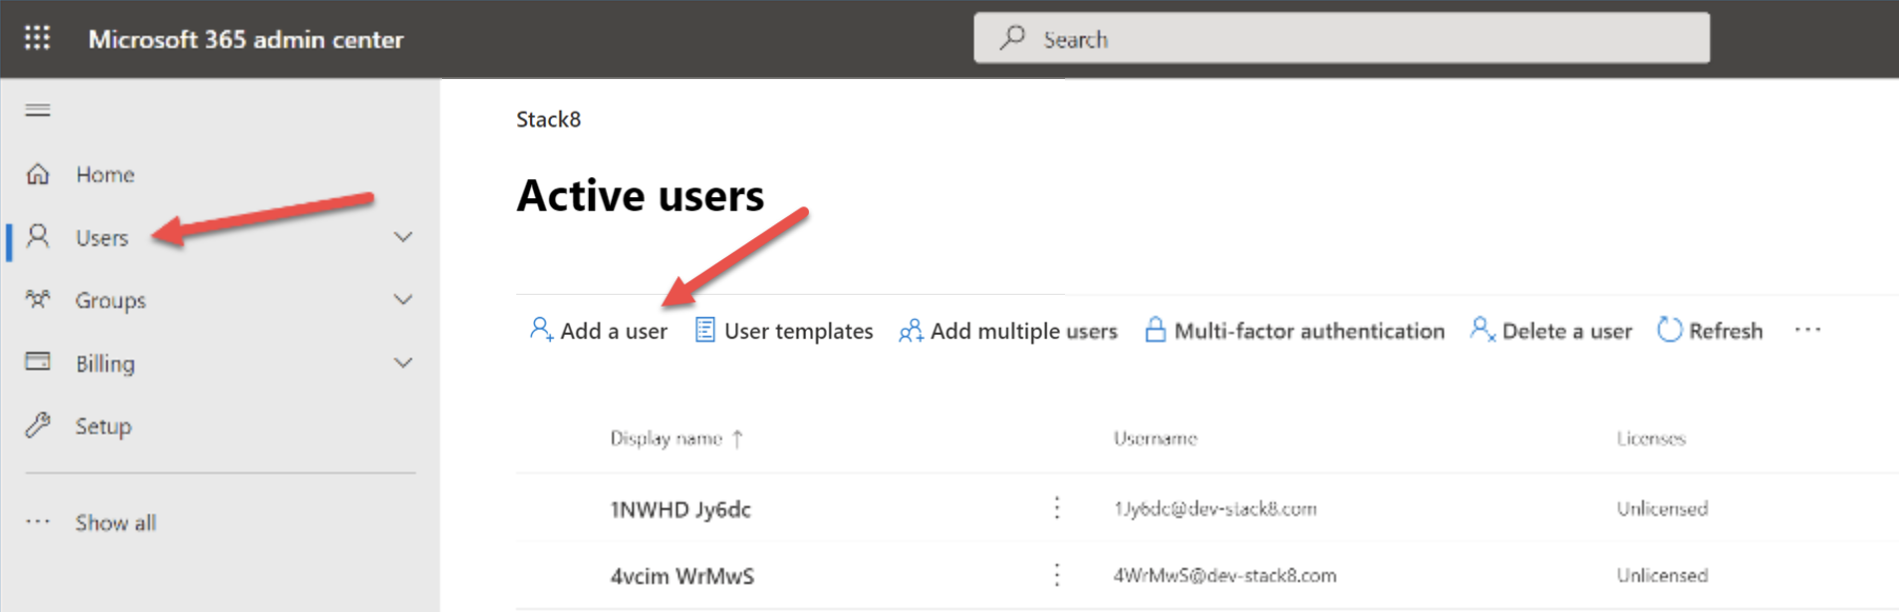 Microsoft 365 admin center user interface with arrows pointing to the User menu and Add a user option